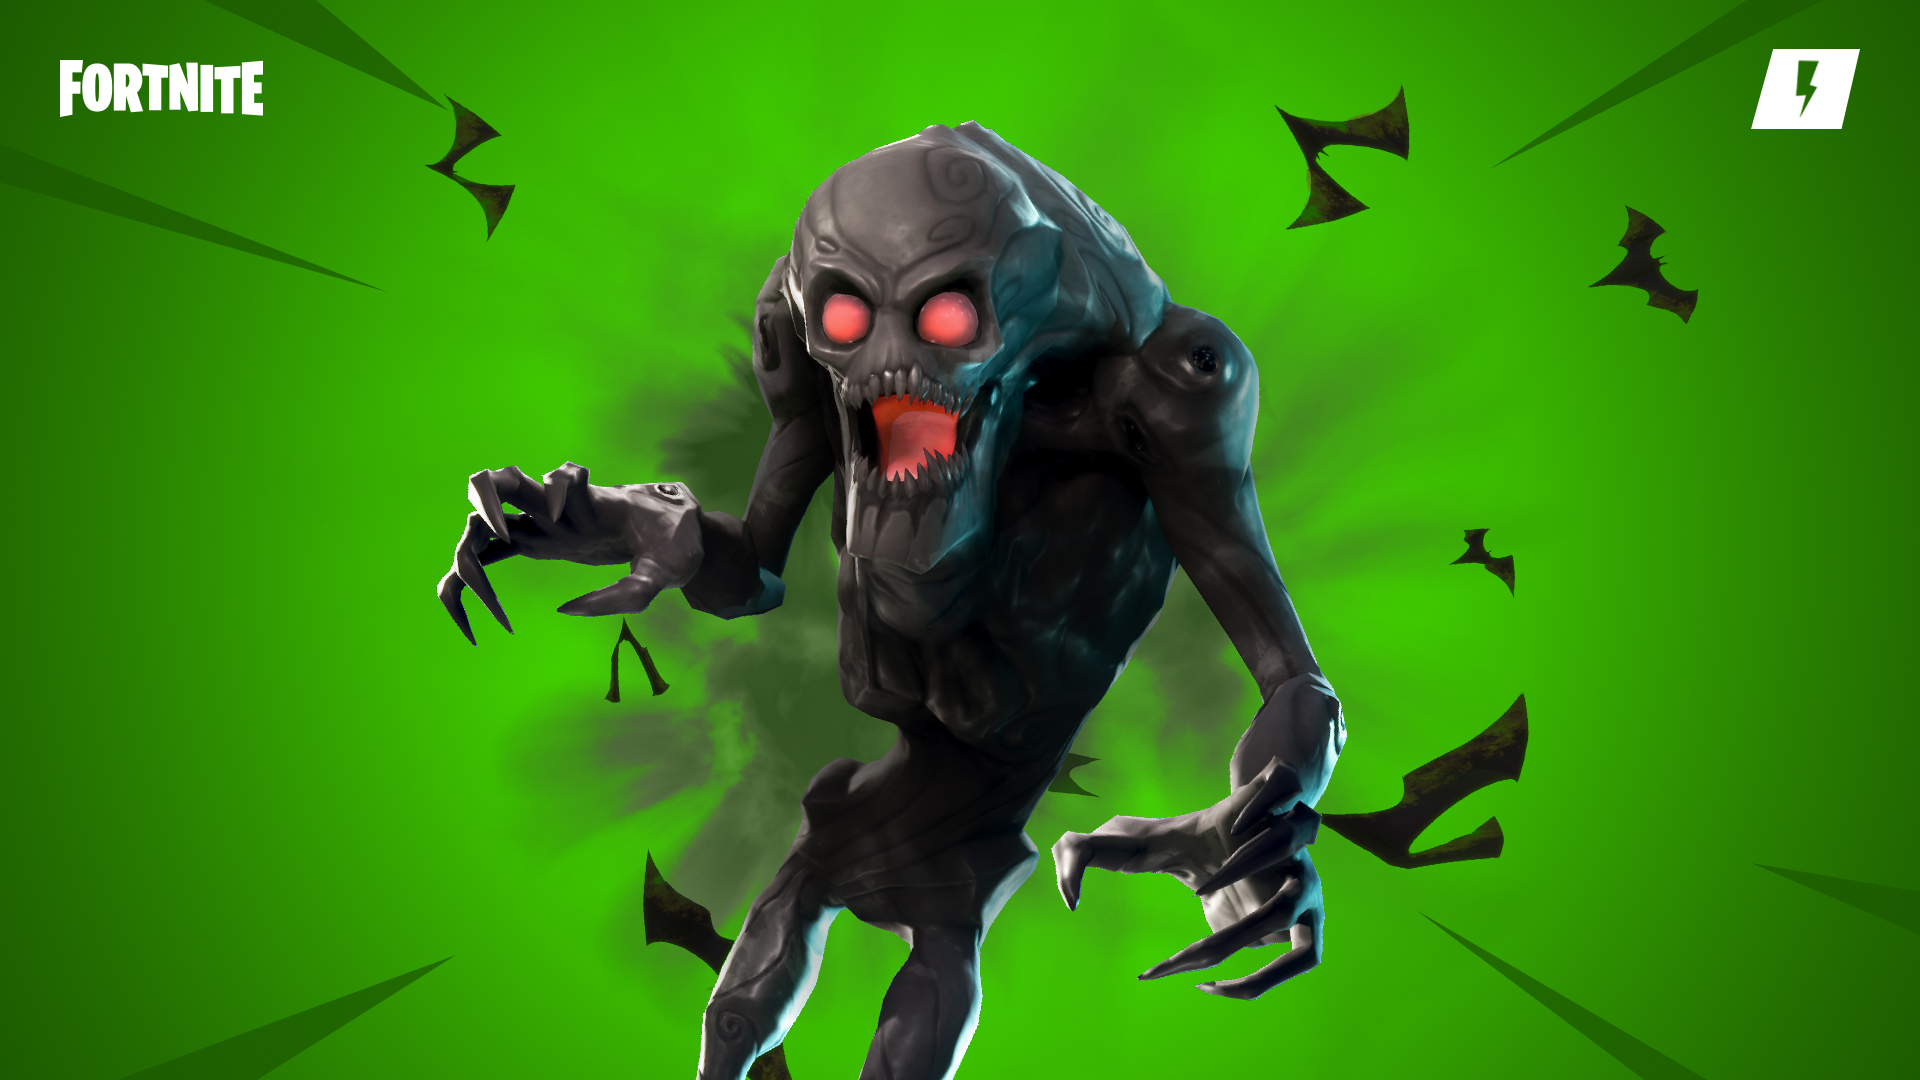 right click view image for full resolution - fortnite save the world mist monster data